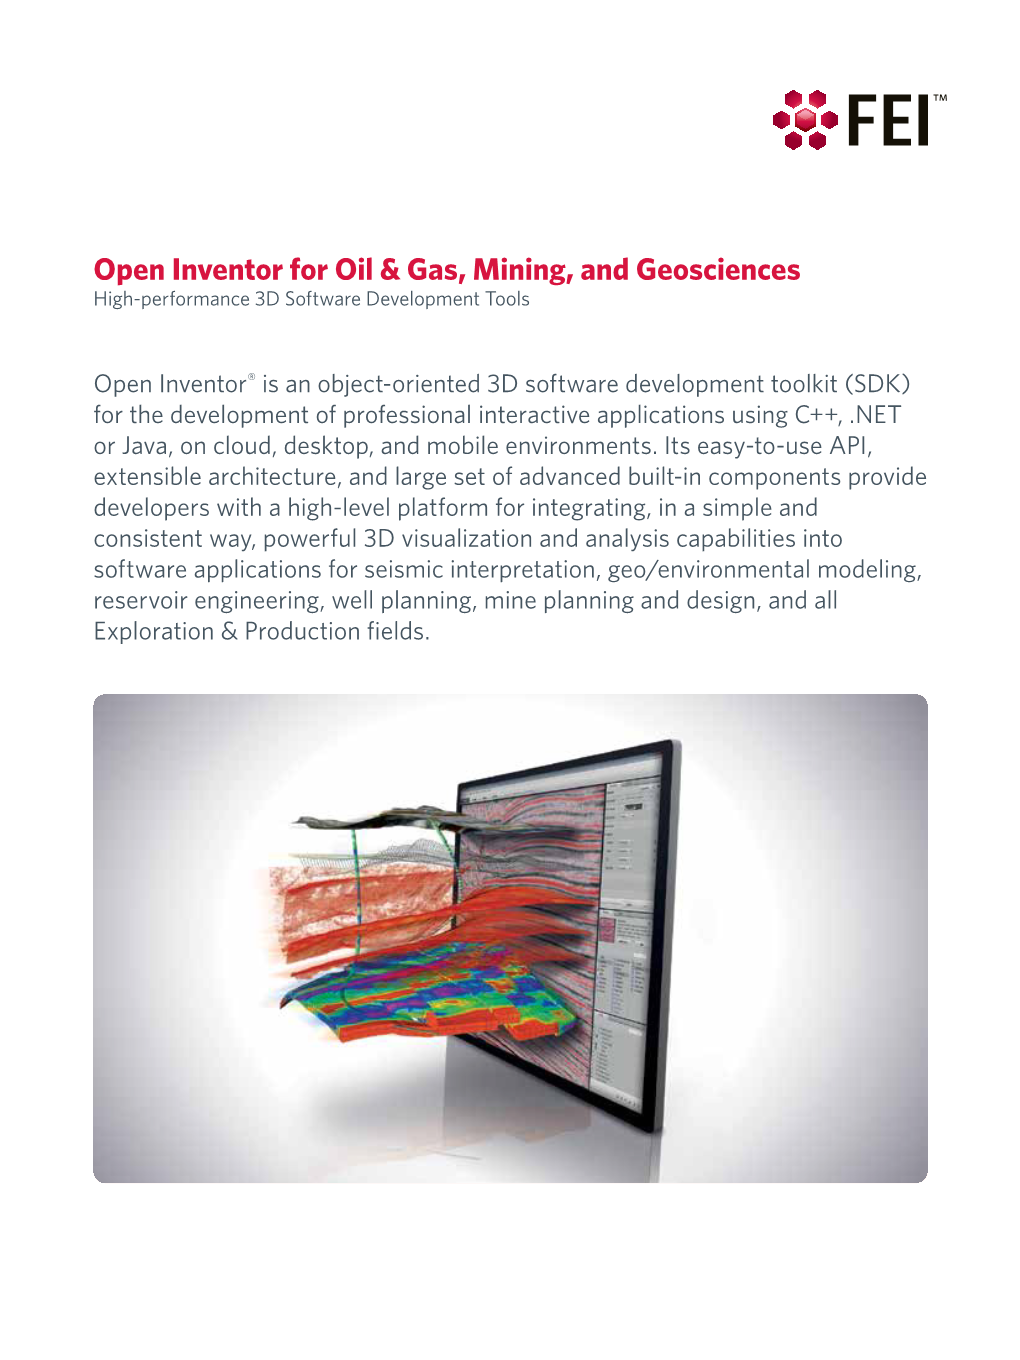 Open Inventor for Oil & Gas, Mining, and Geosciences